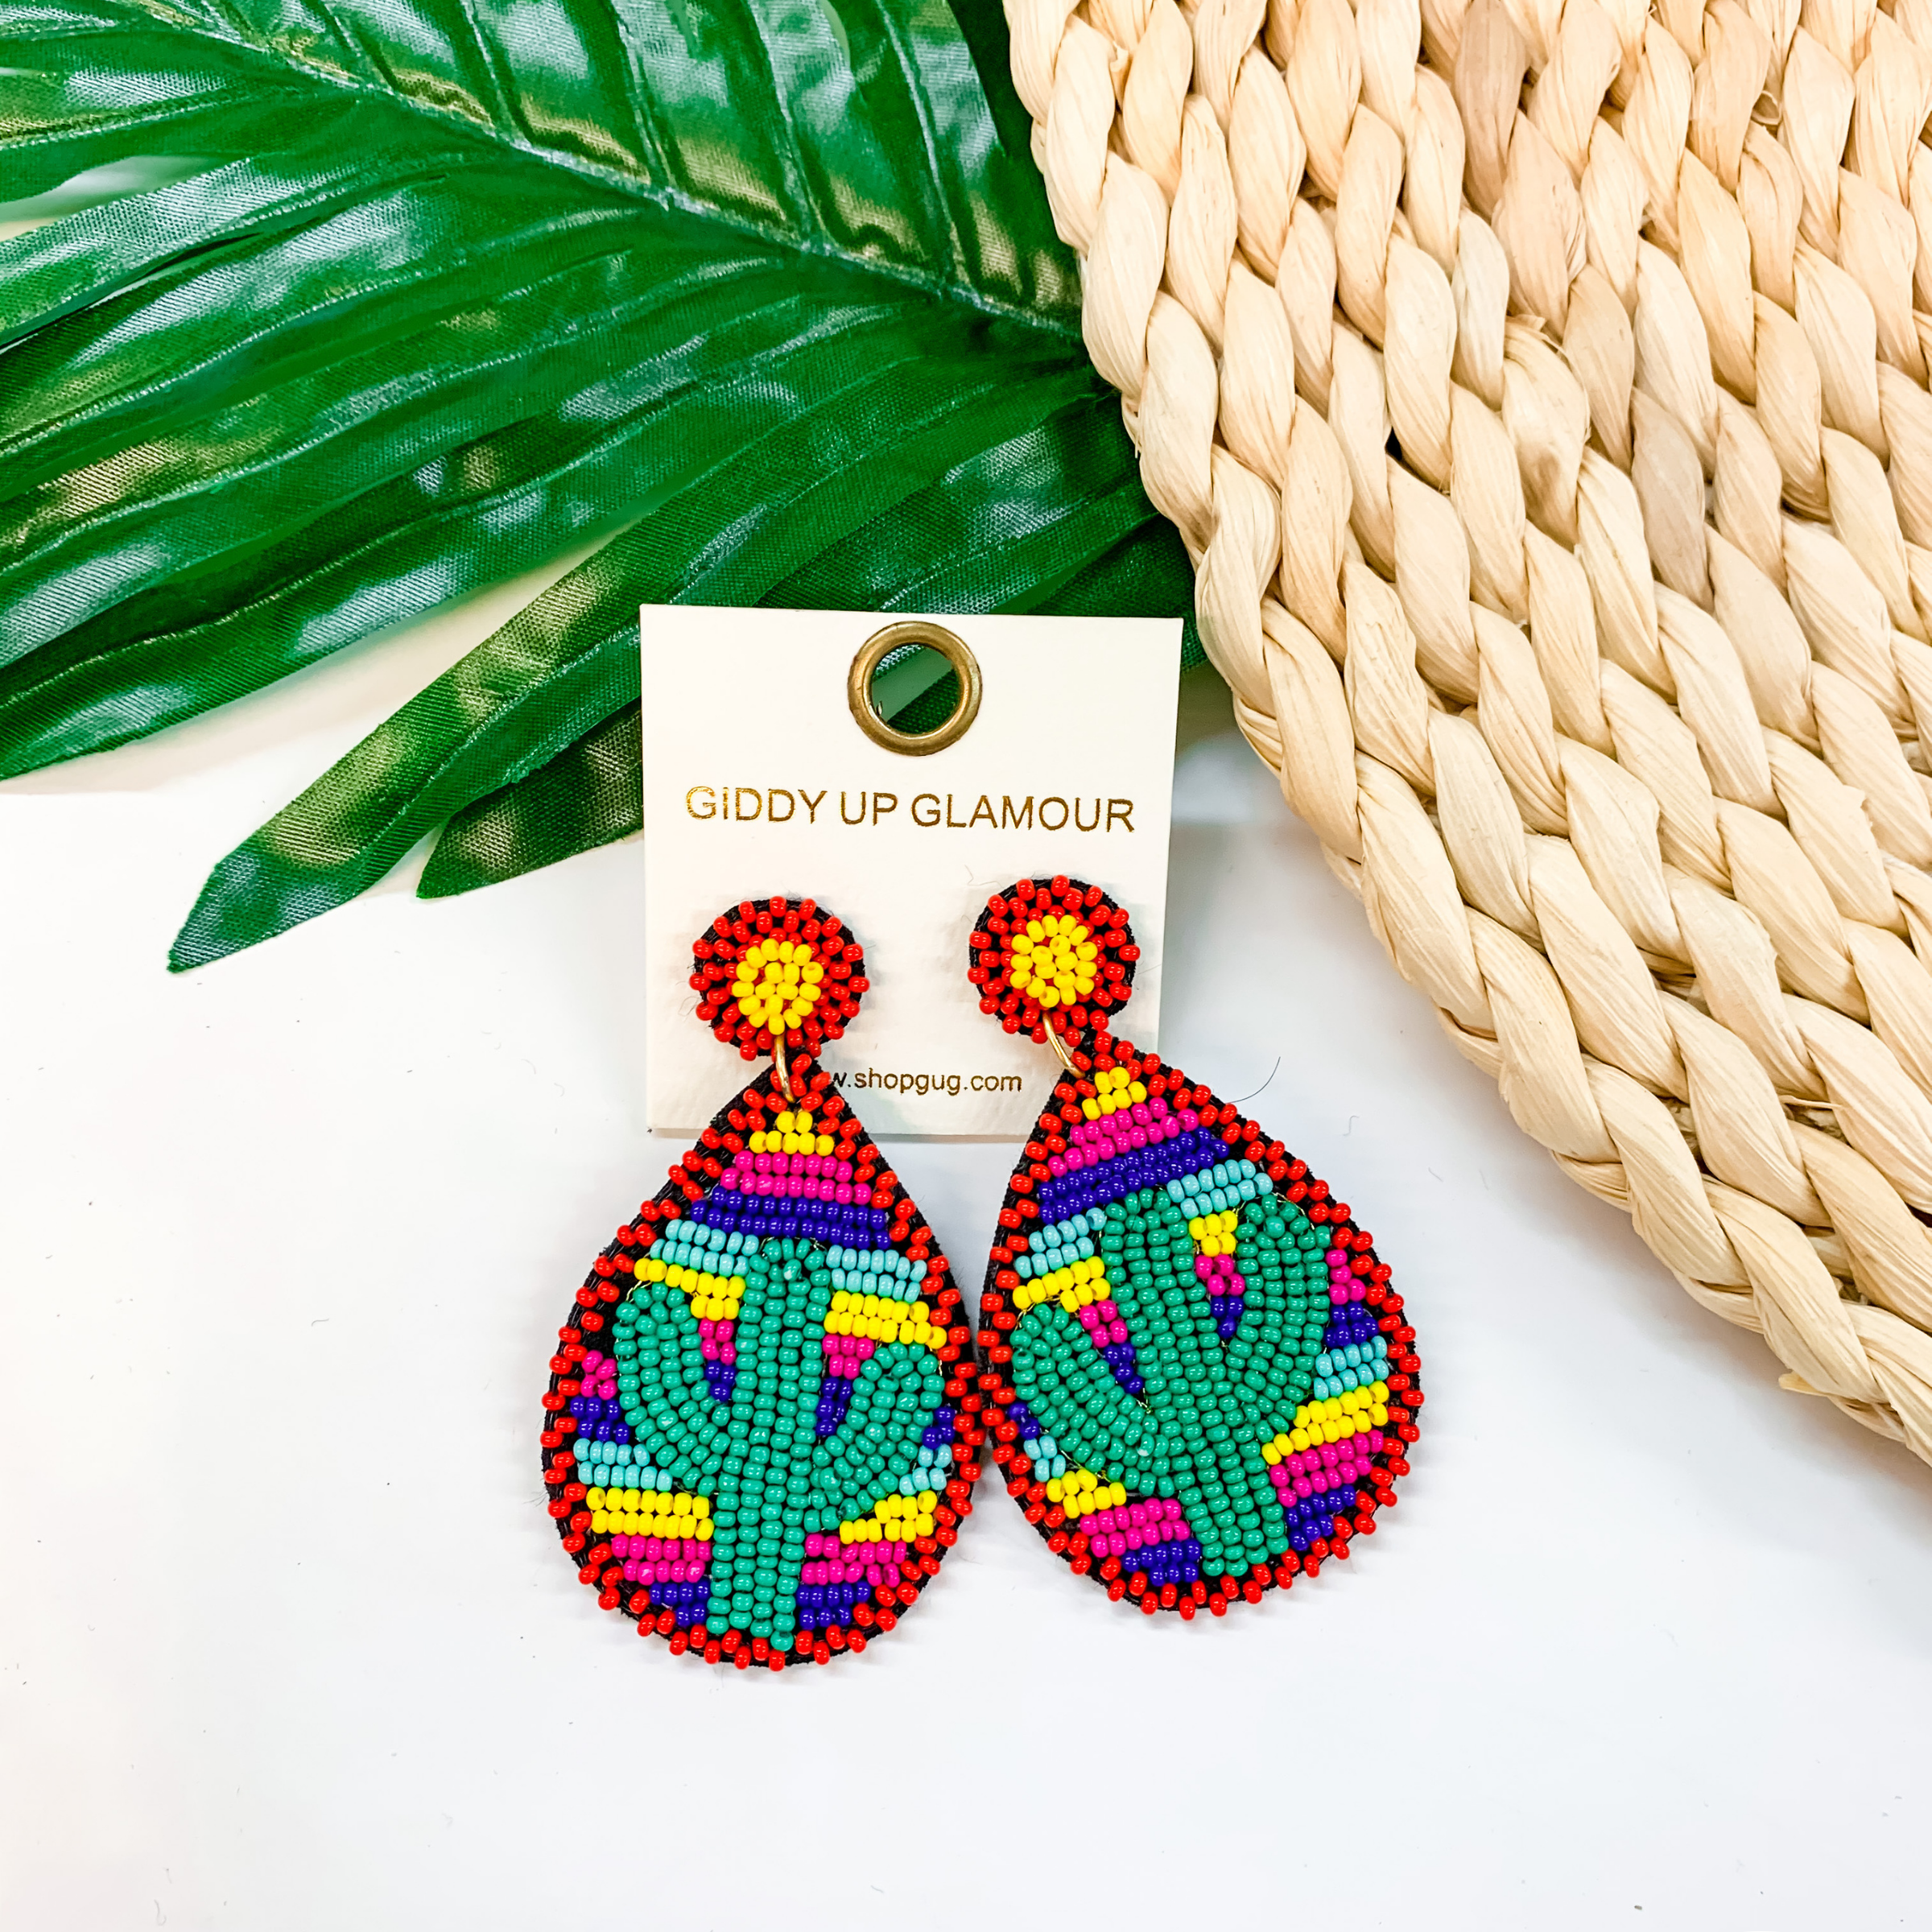 Lookin' Sharp Seed Bead Cactus Teardrop Earrings In Red Serape and Green - Giddy Up Glamour Boutique